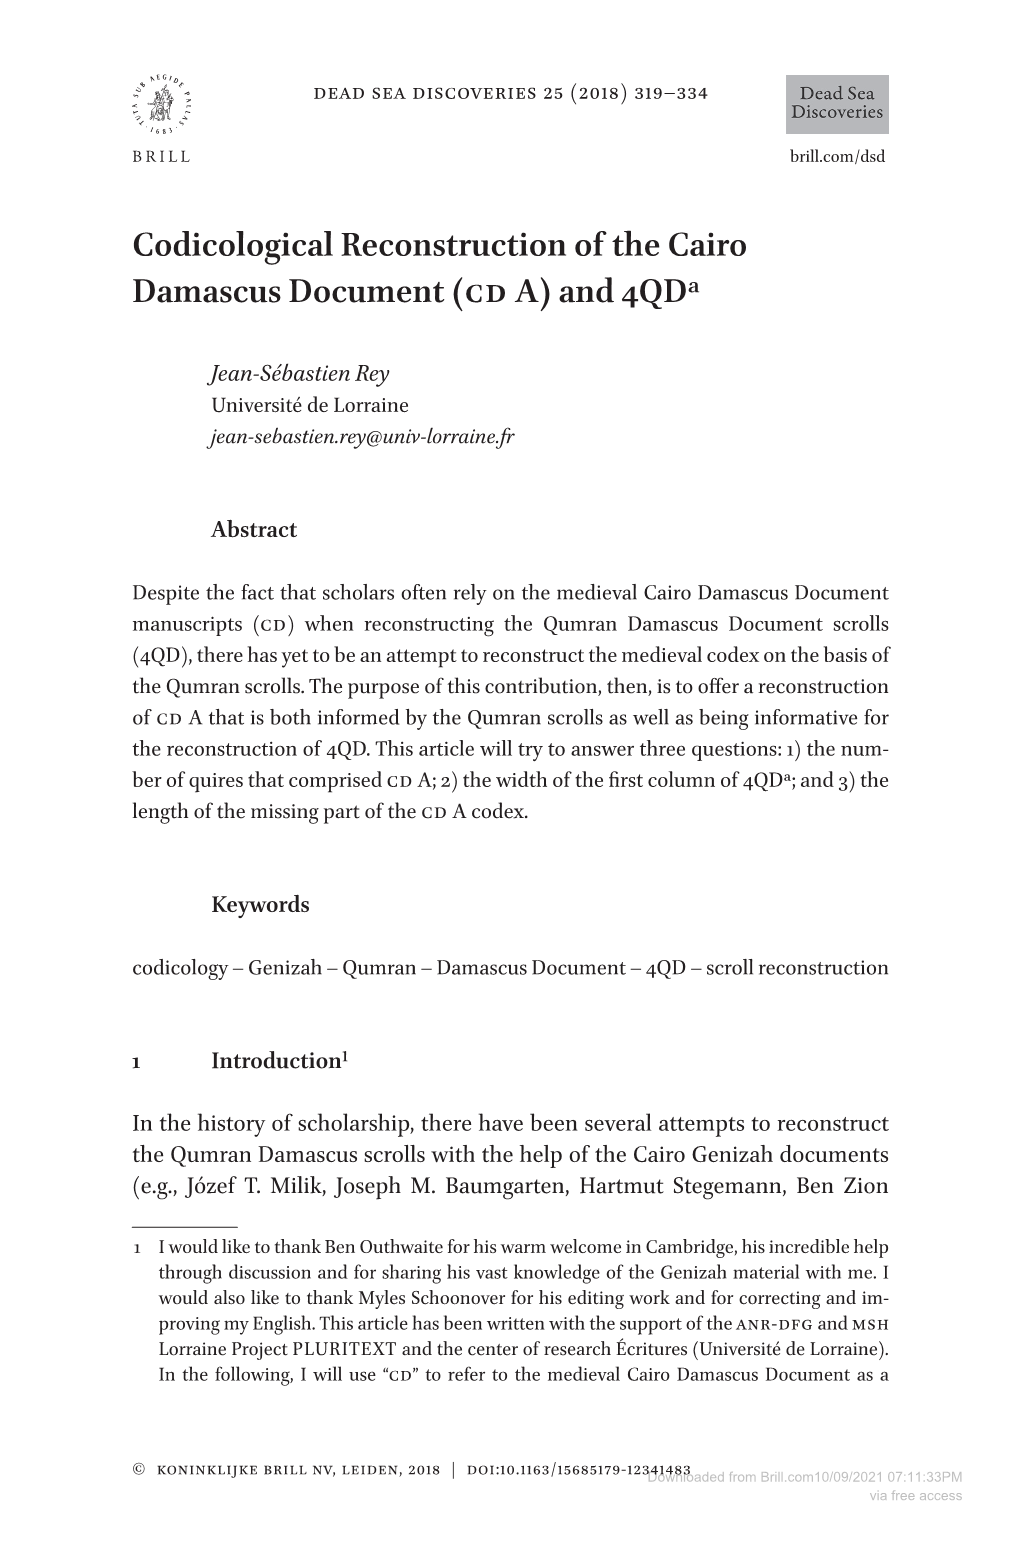 Codicological Reconstruction of the Cairo Damascus Document (CD A) and 4Qda